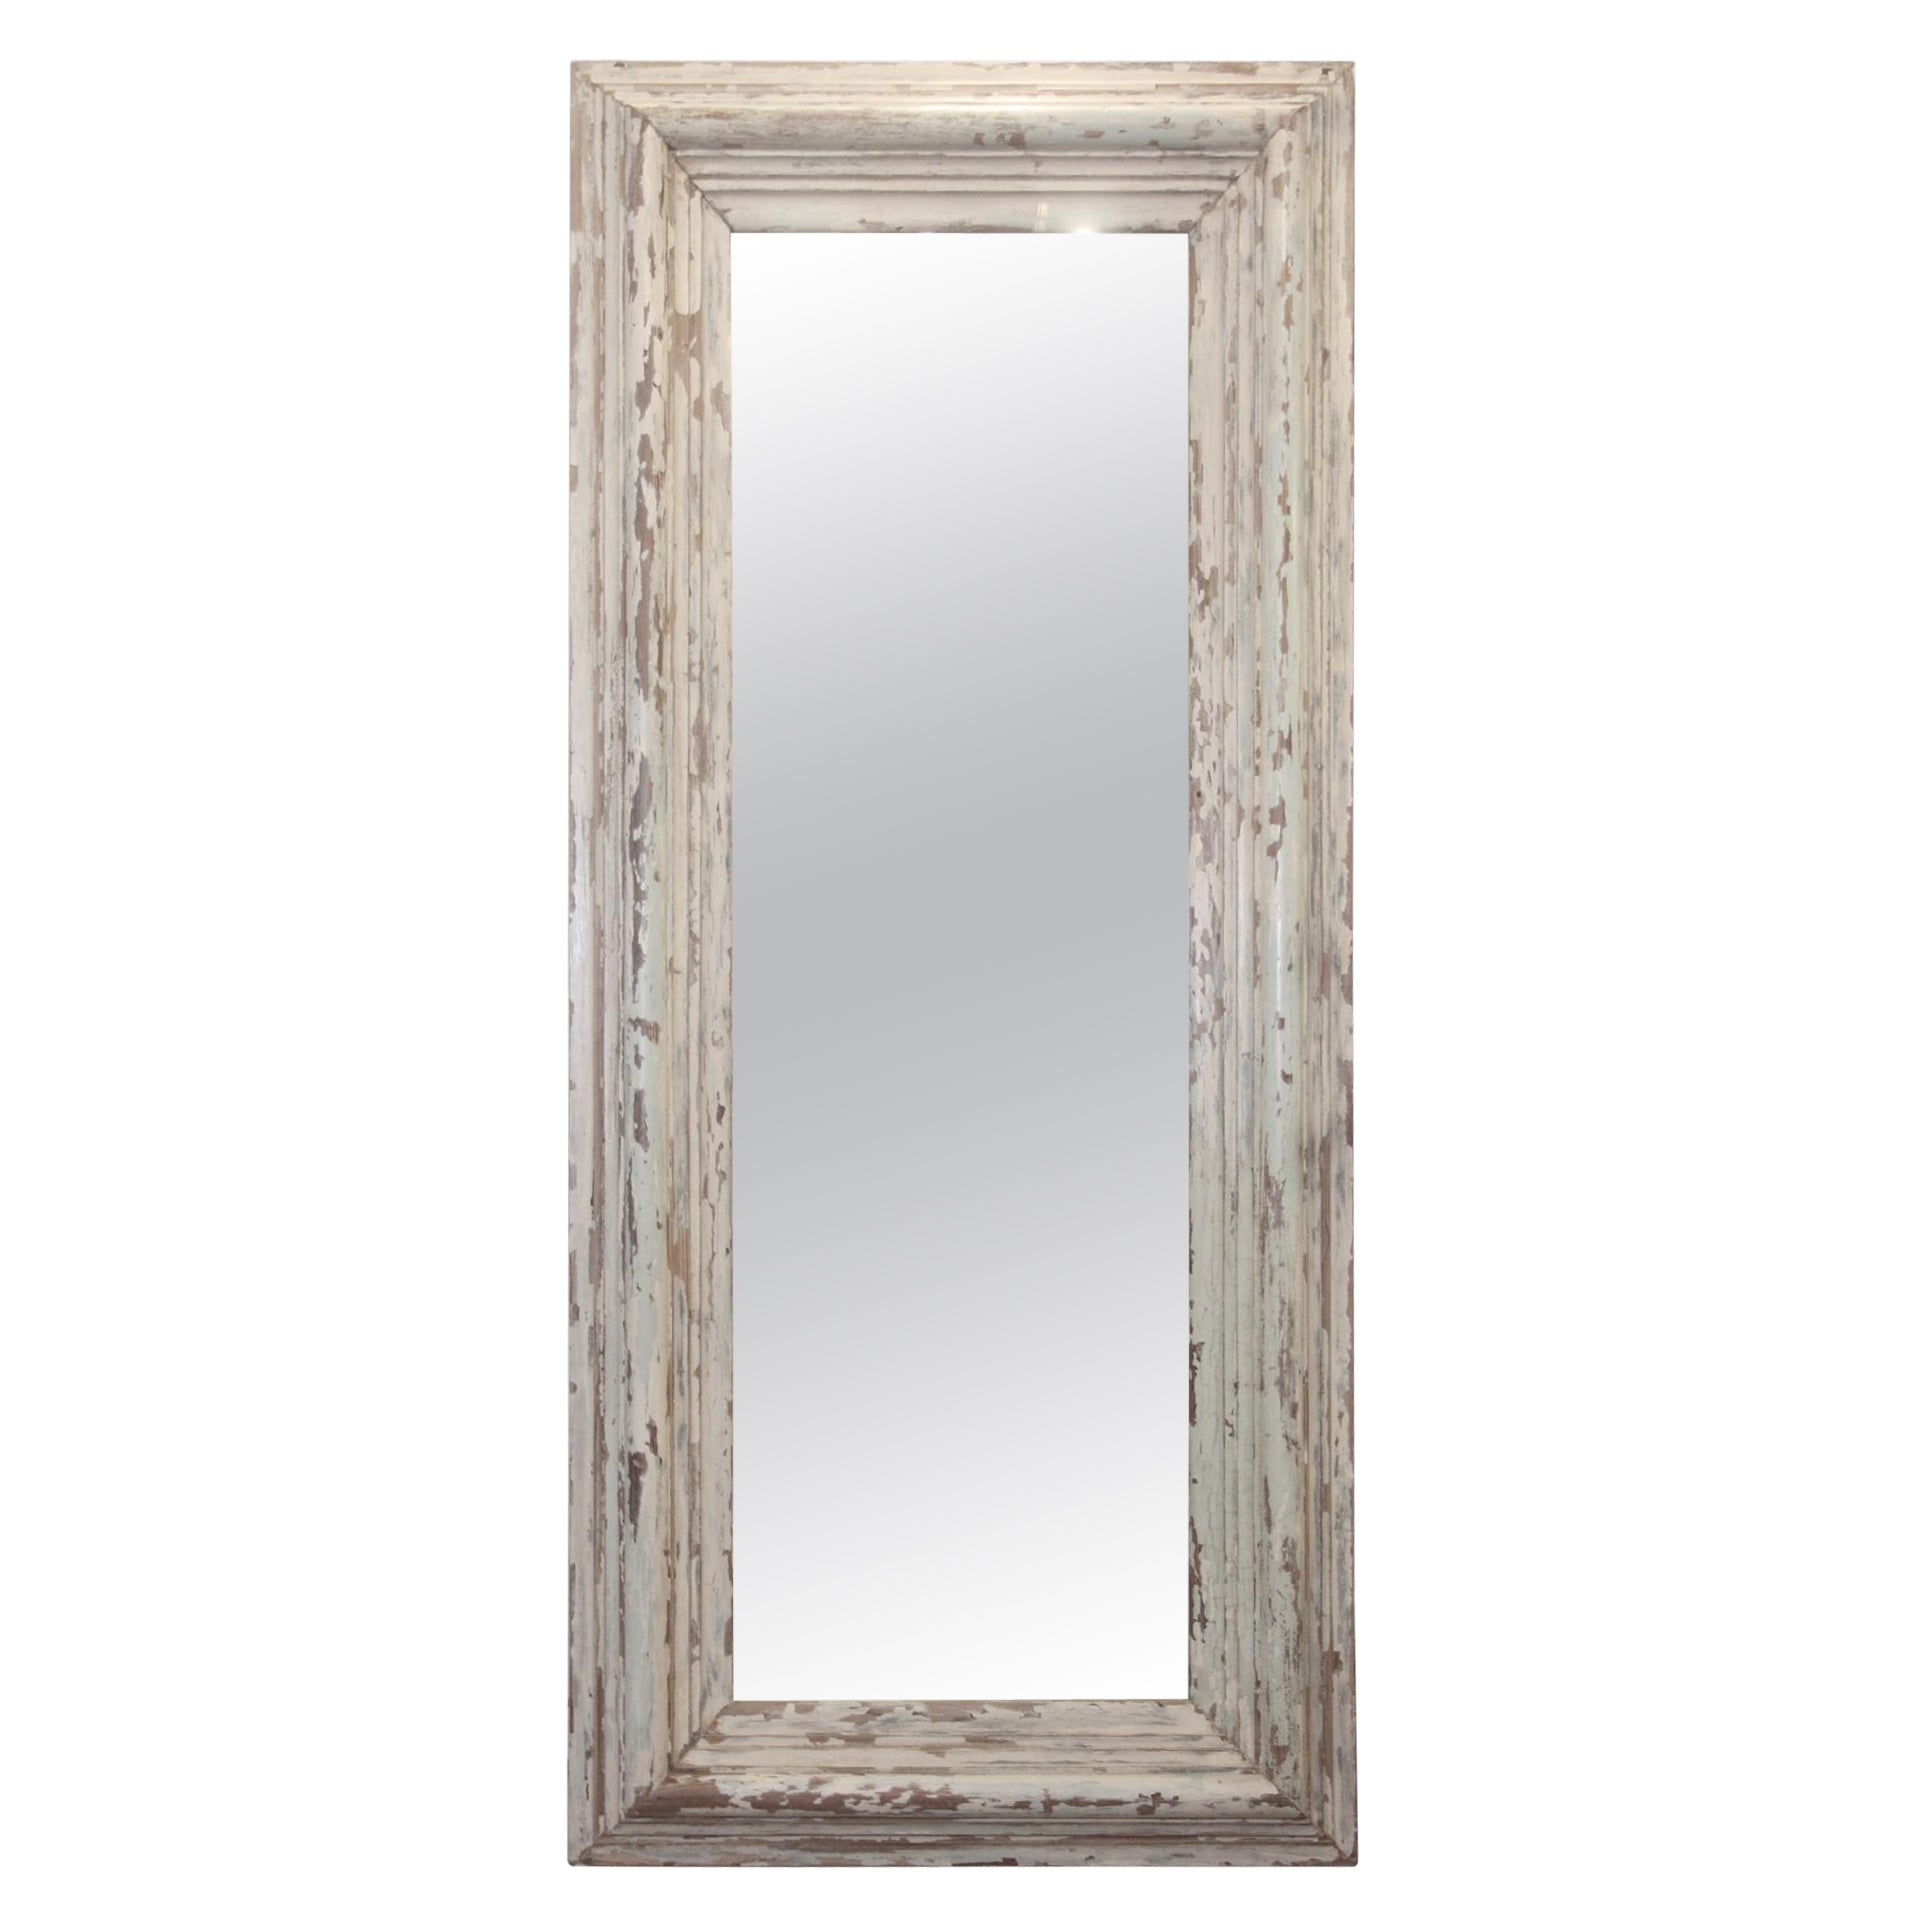 Mirror made from 1800s Brownstone Molding Original Paint